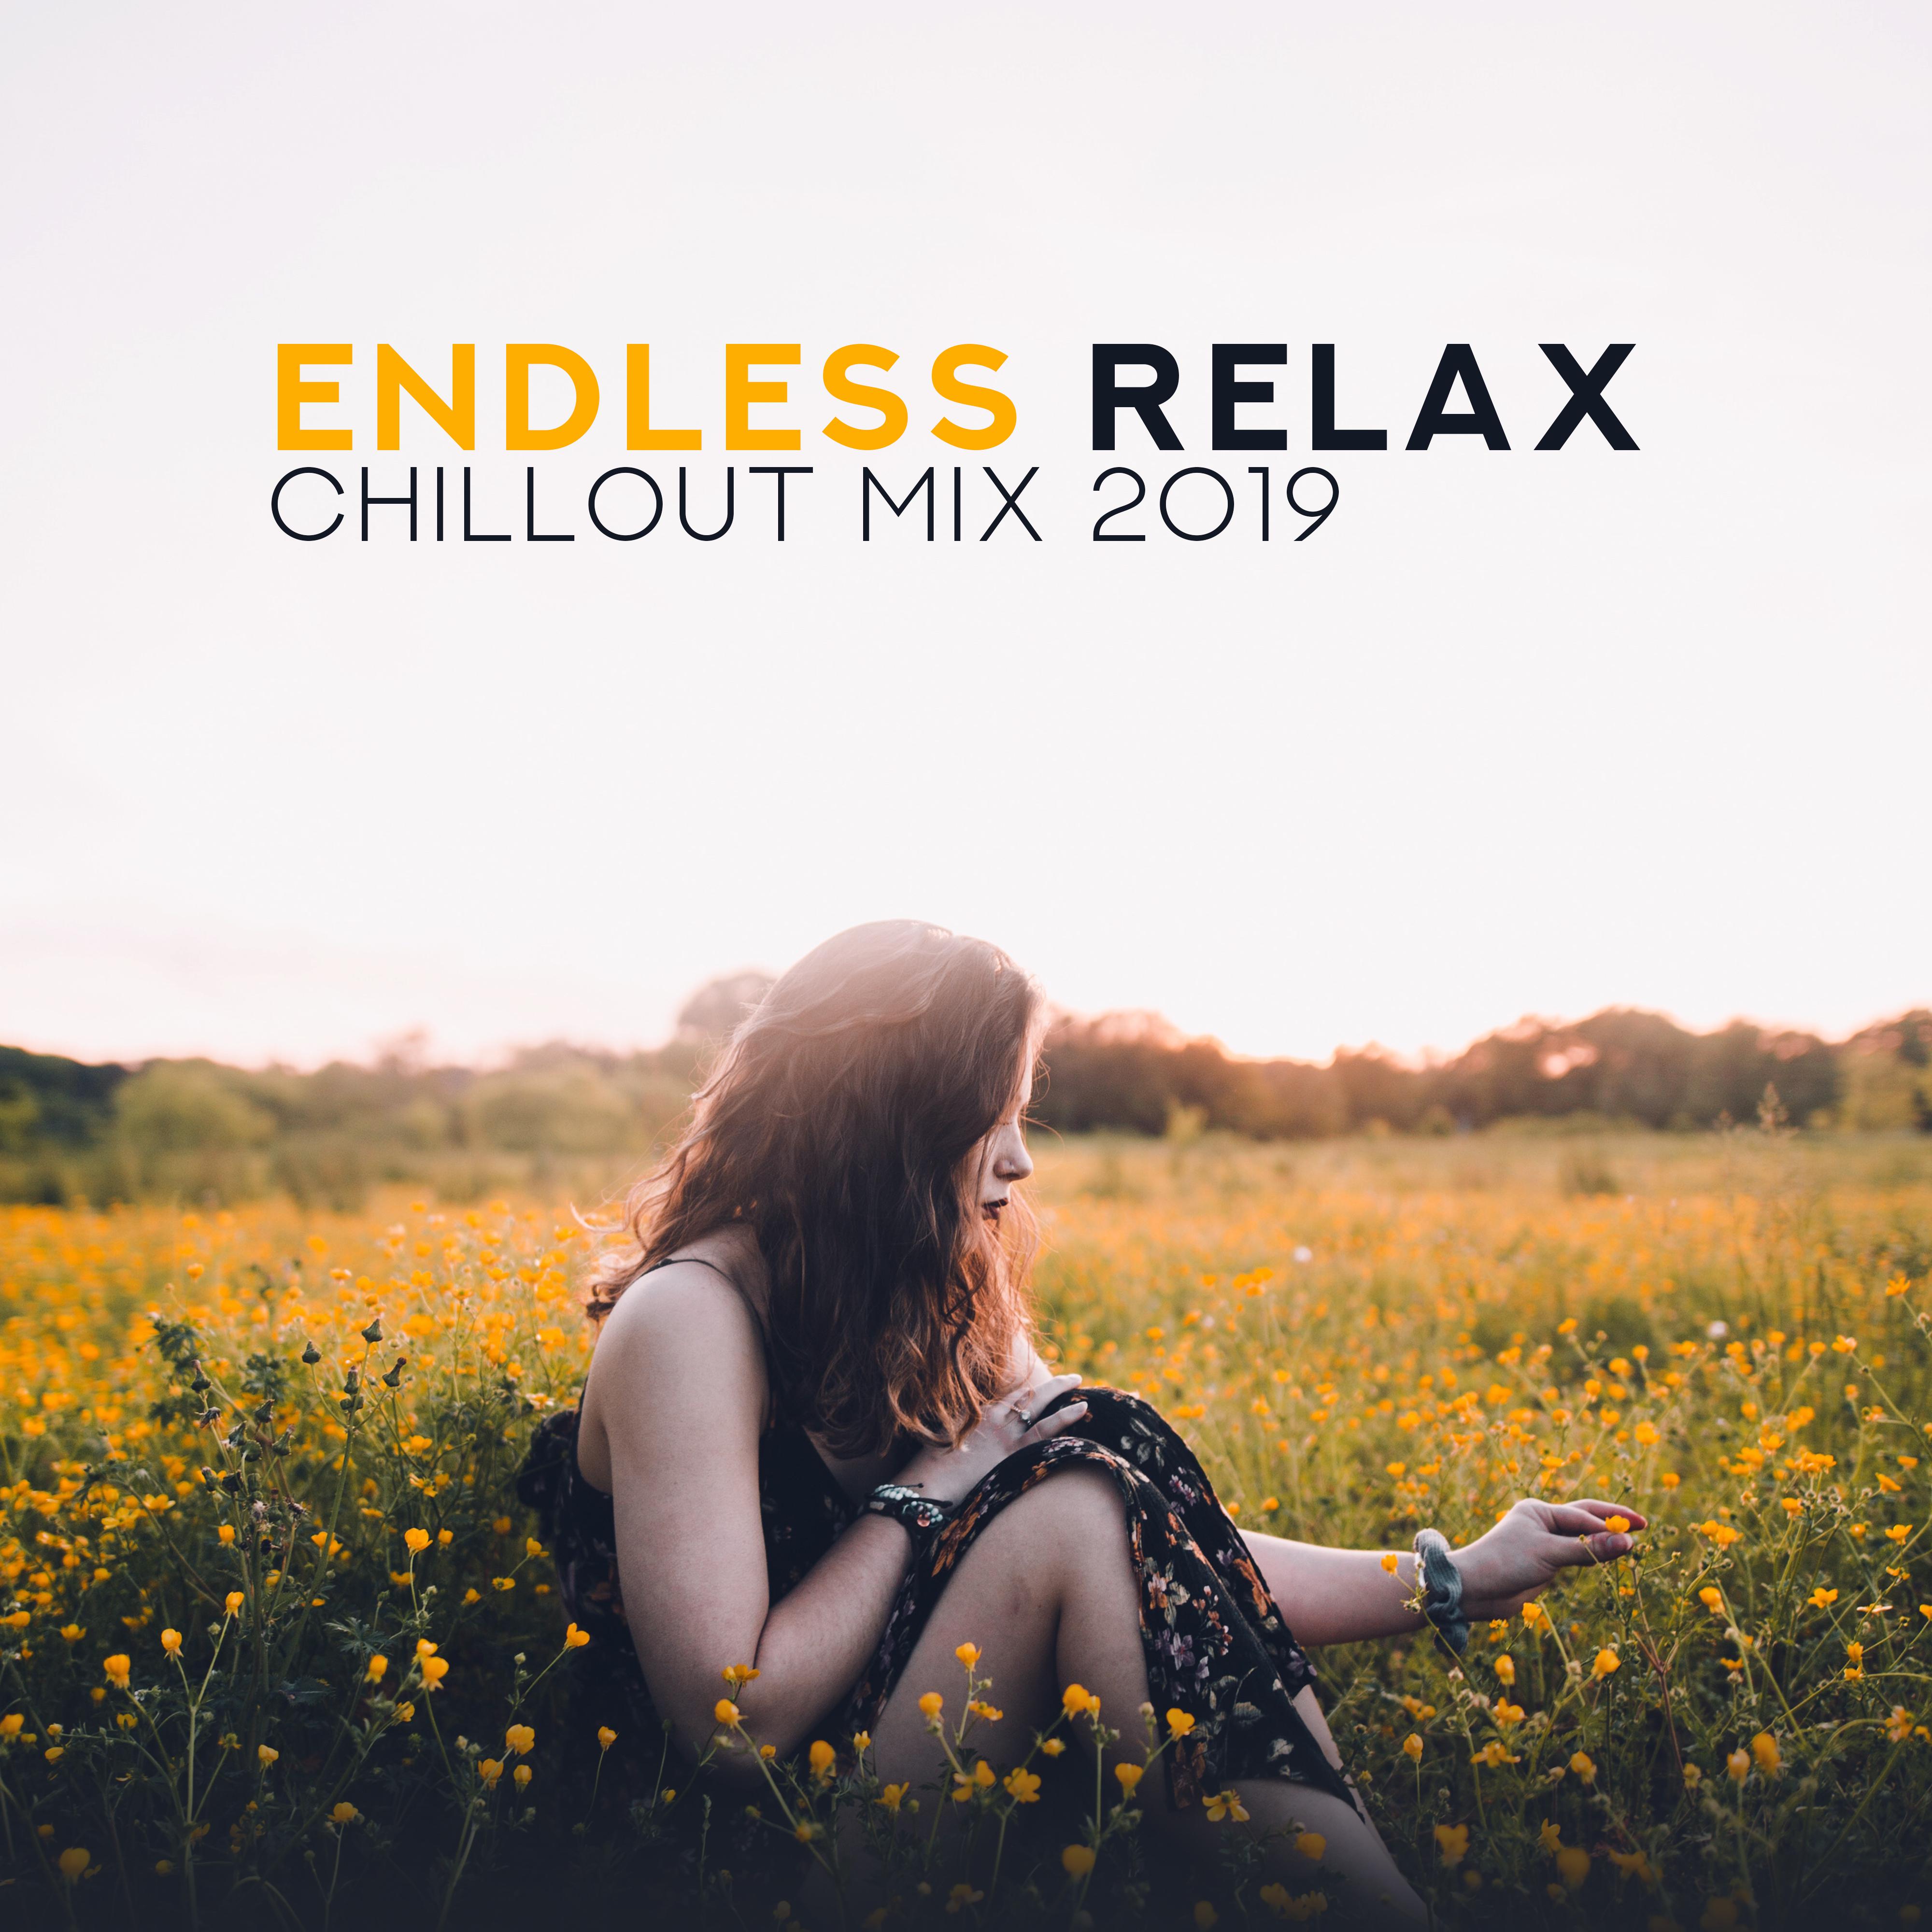 Endless Relax Chillout Mix 2019 – Compilation of Best Chill Out Vibes for Total Rest & Relaxation, Calming Down, Stress Relief Beats